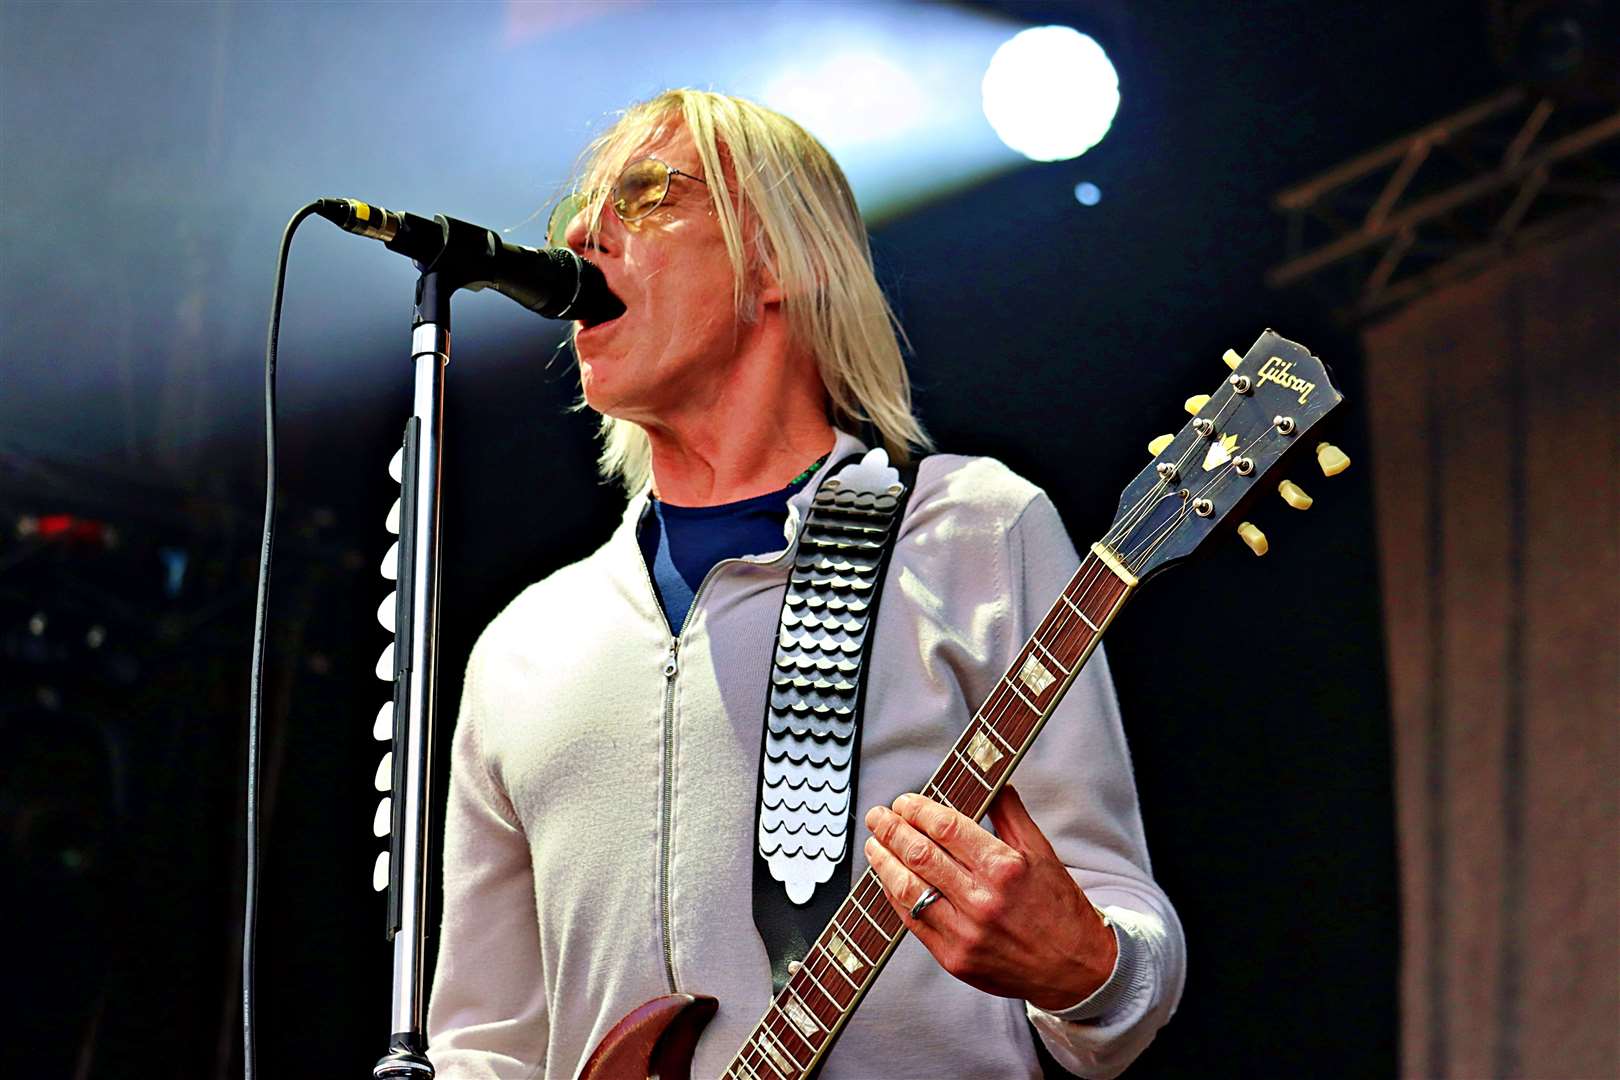 Paul Weller was at the forefront of the Mod revival with hits such as A Town Called Malice. Picture: Rob Currell